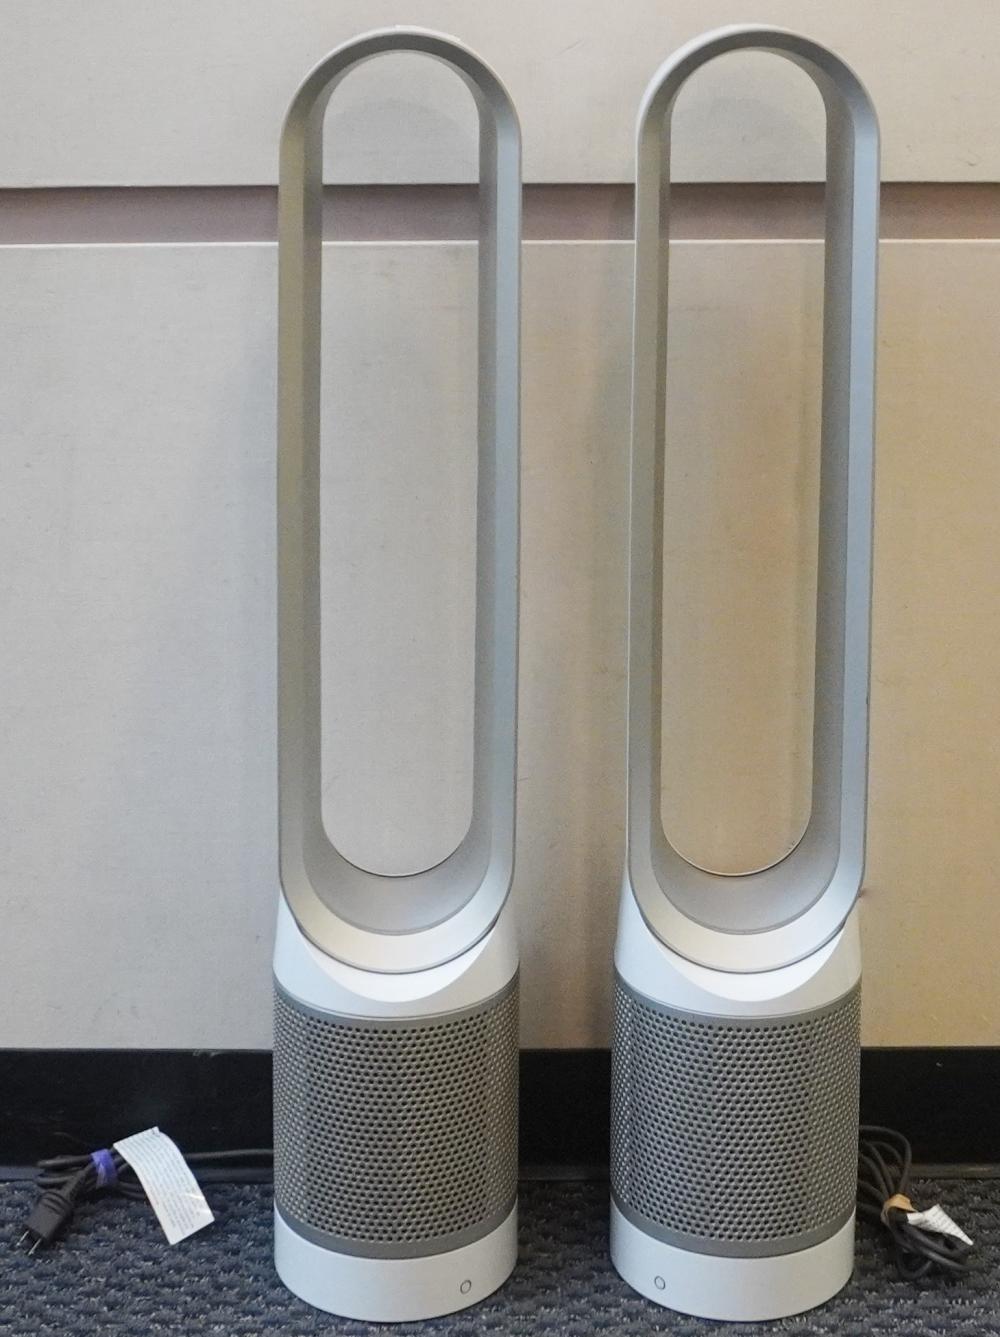 TWO DYSON TOWER AIR PURIFIER FANS